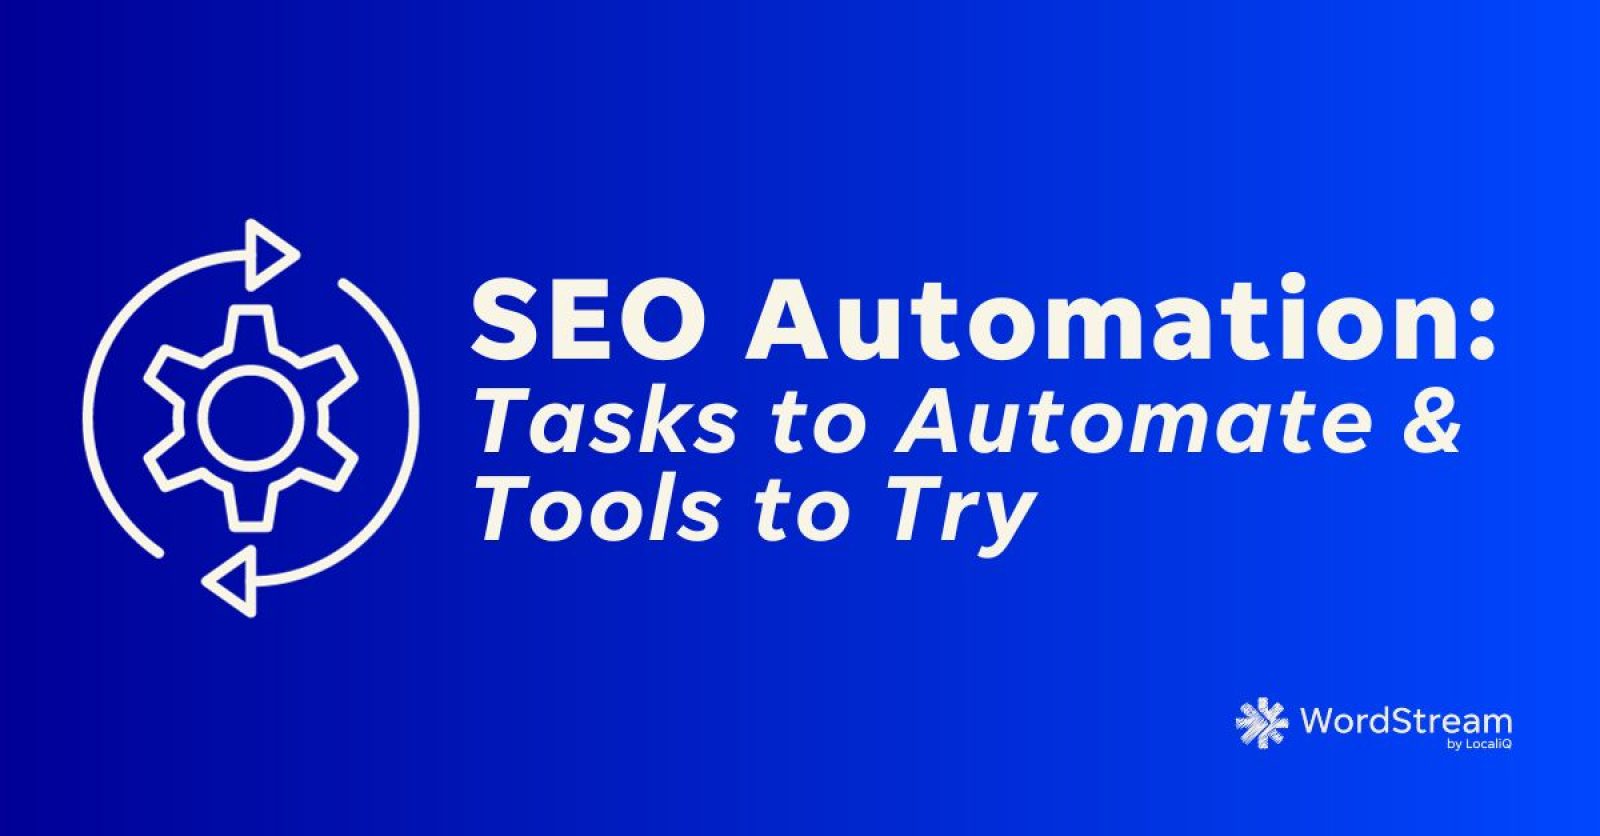 SEO Automation: 5 Tasks to Automate for Better Results (+Tools to Try)